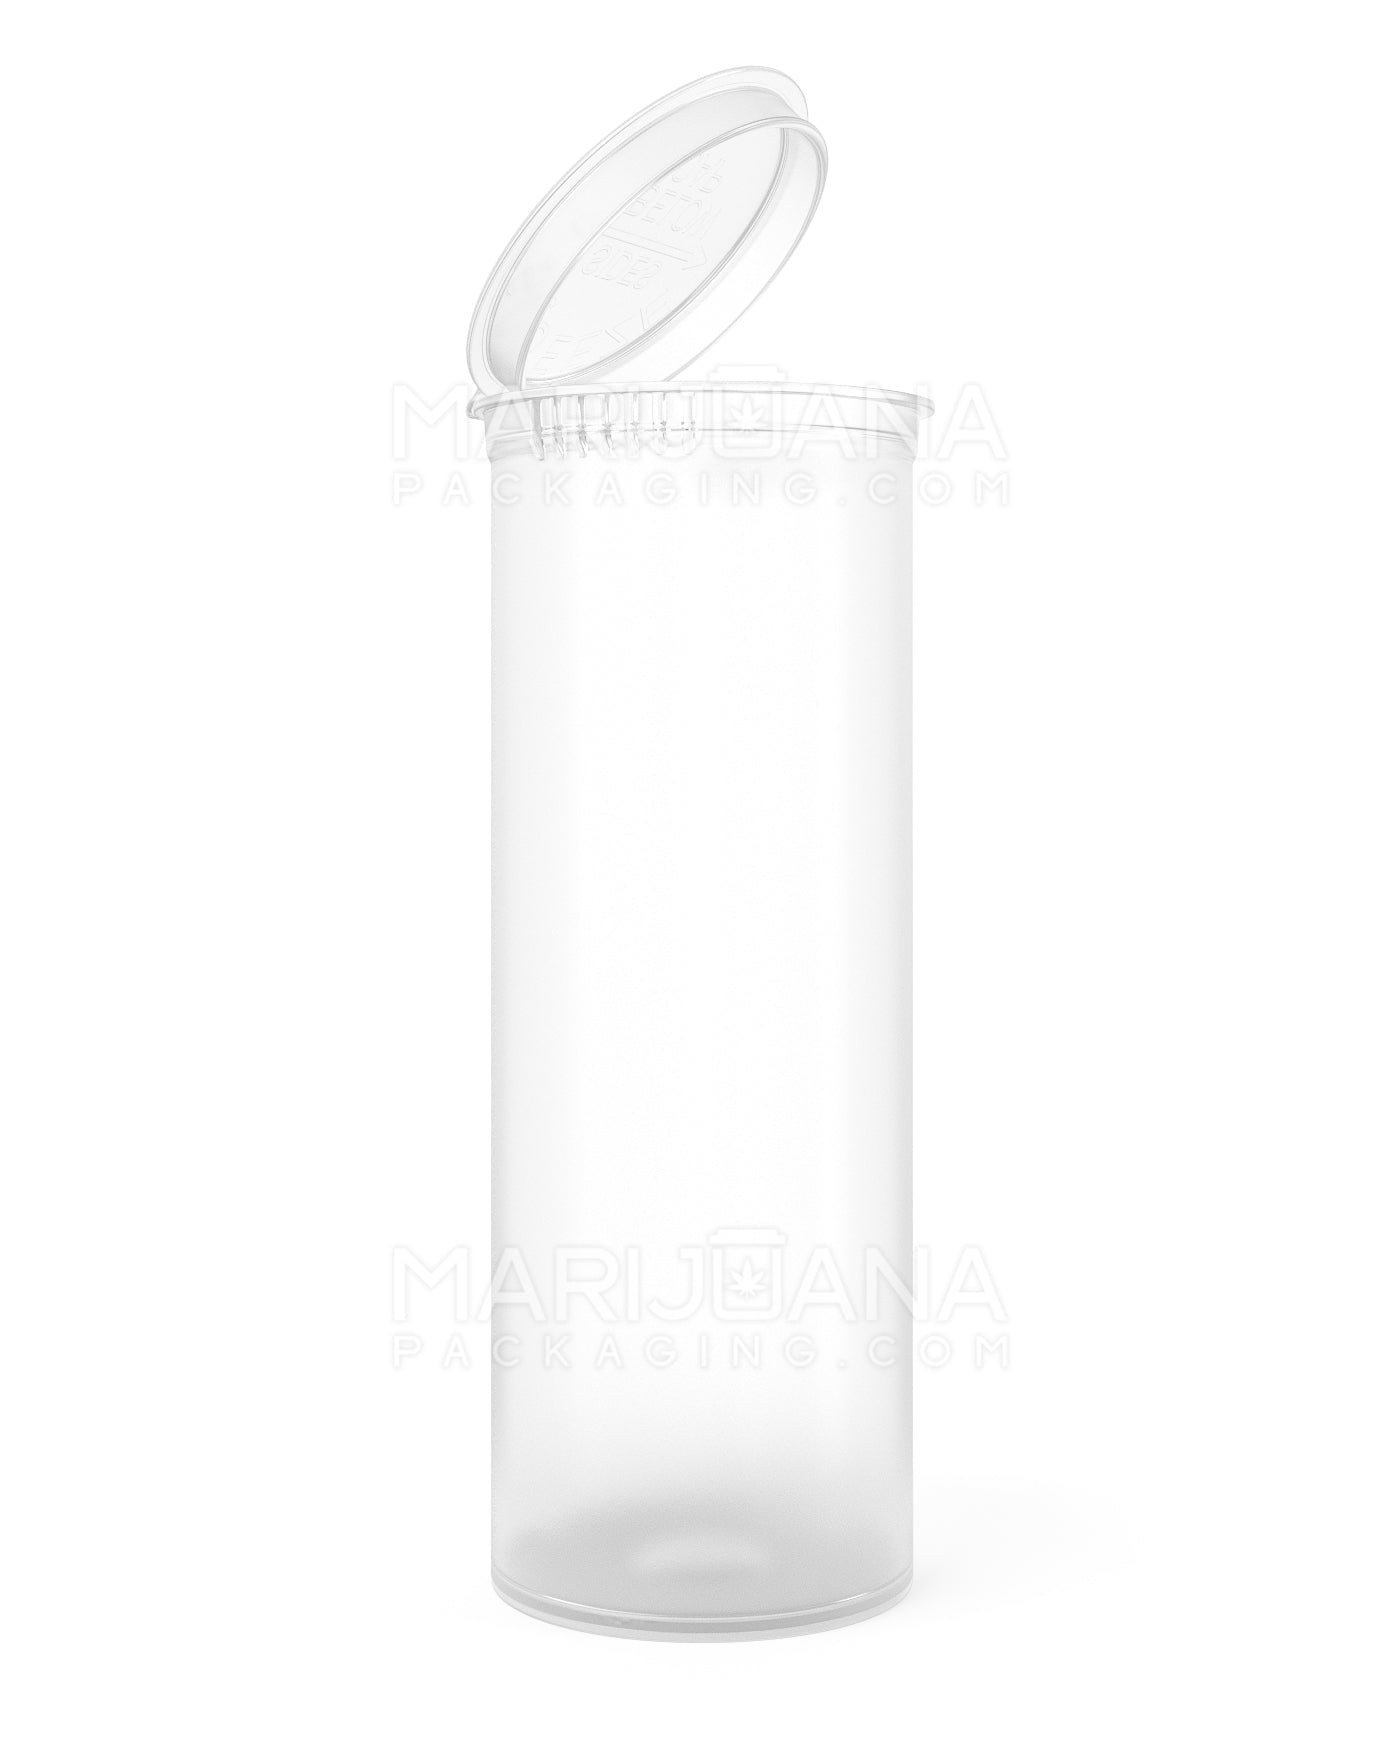 Child Resistant & Sustainable | 100% Biodegradable Clear Pop Top Bottles | 60dr - 14g - 75 Count - 1